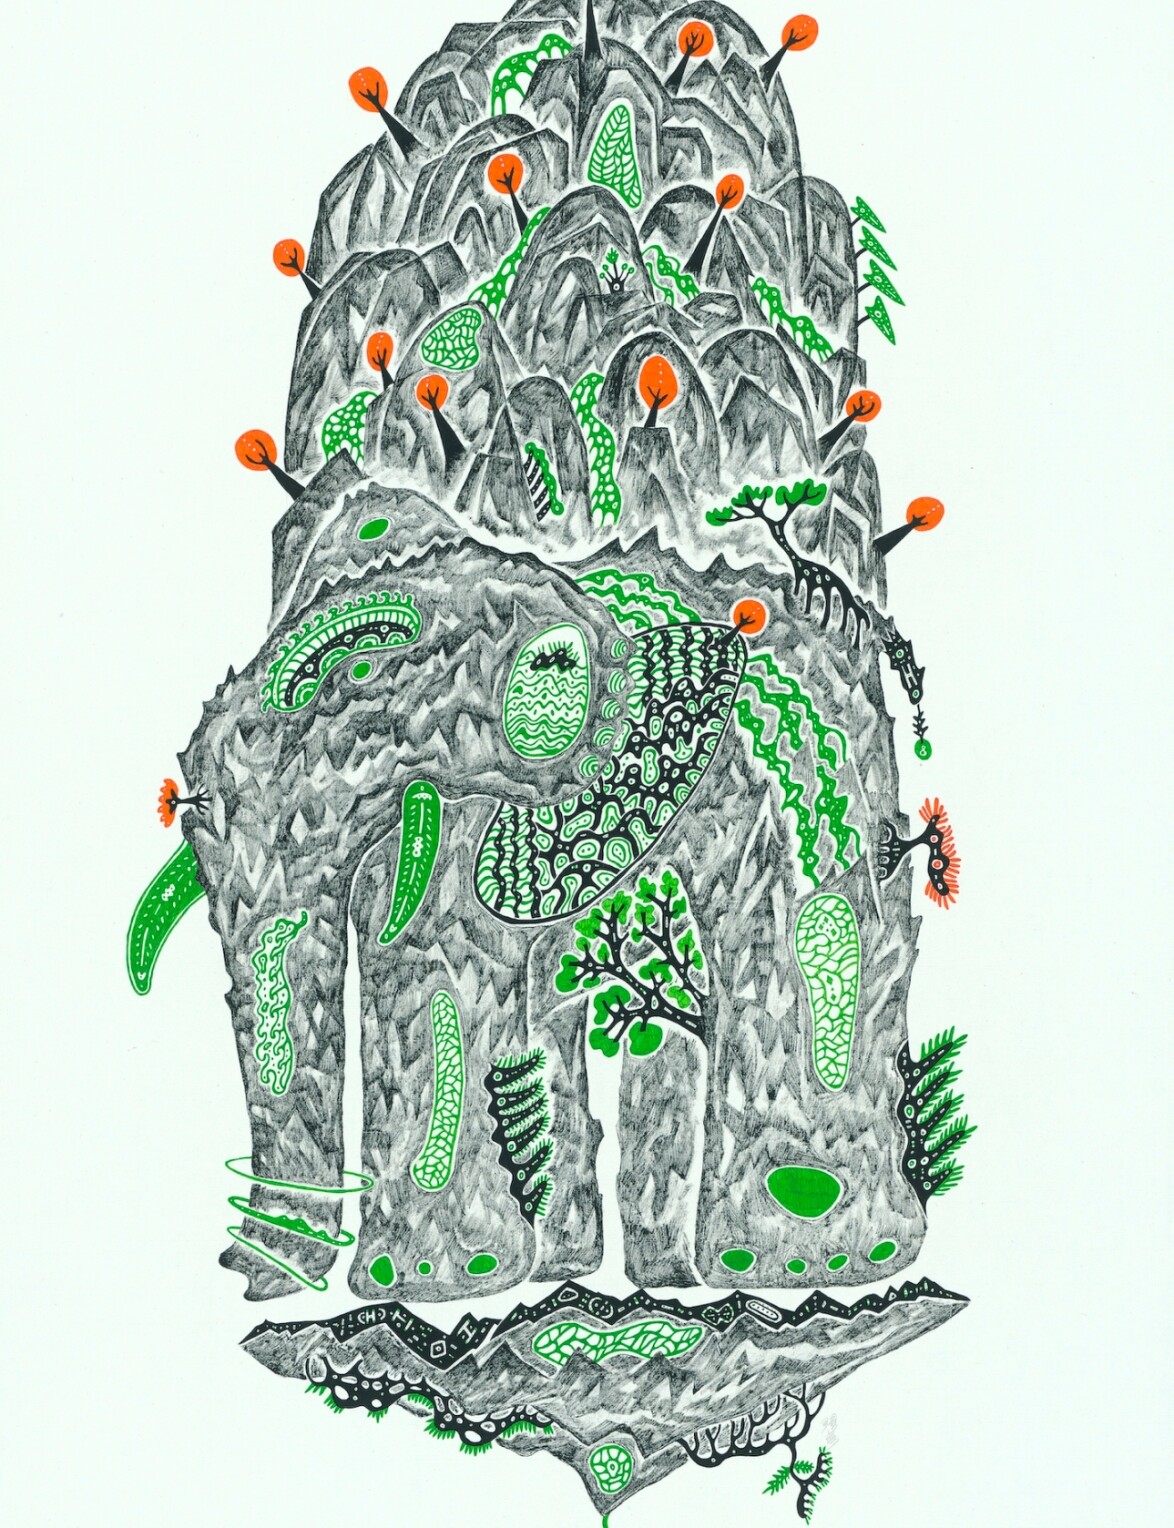 CHEN Pu
Symbiosis_The All-Embracing Island
2022
Ink, color, and ballpoint pen on paper
110×74×3.5cm